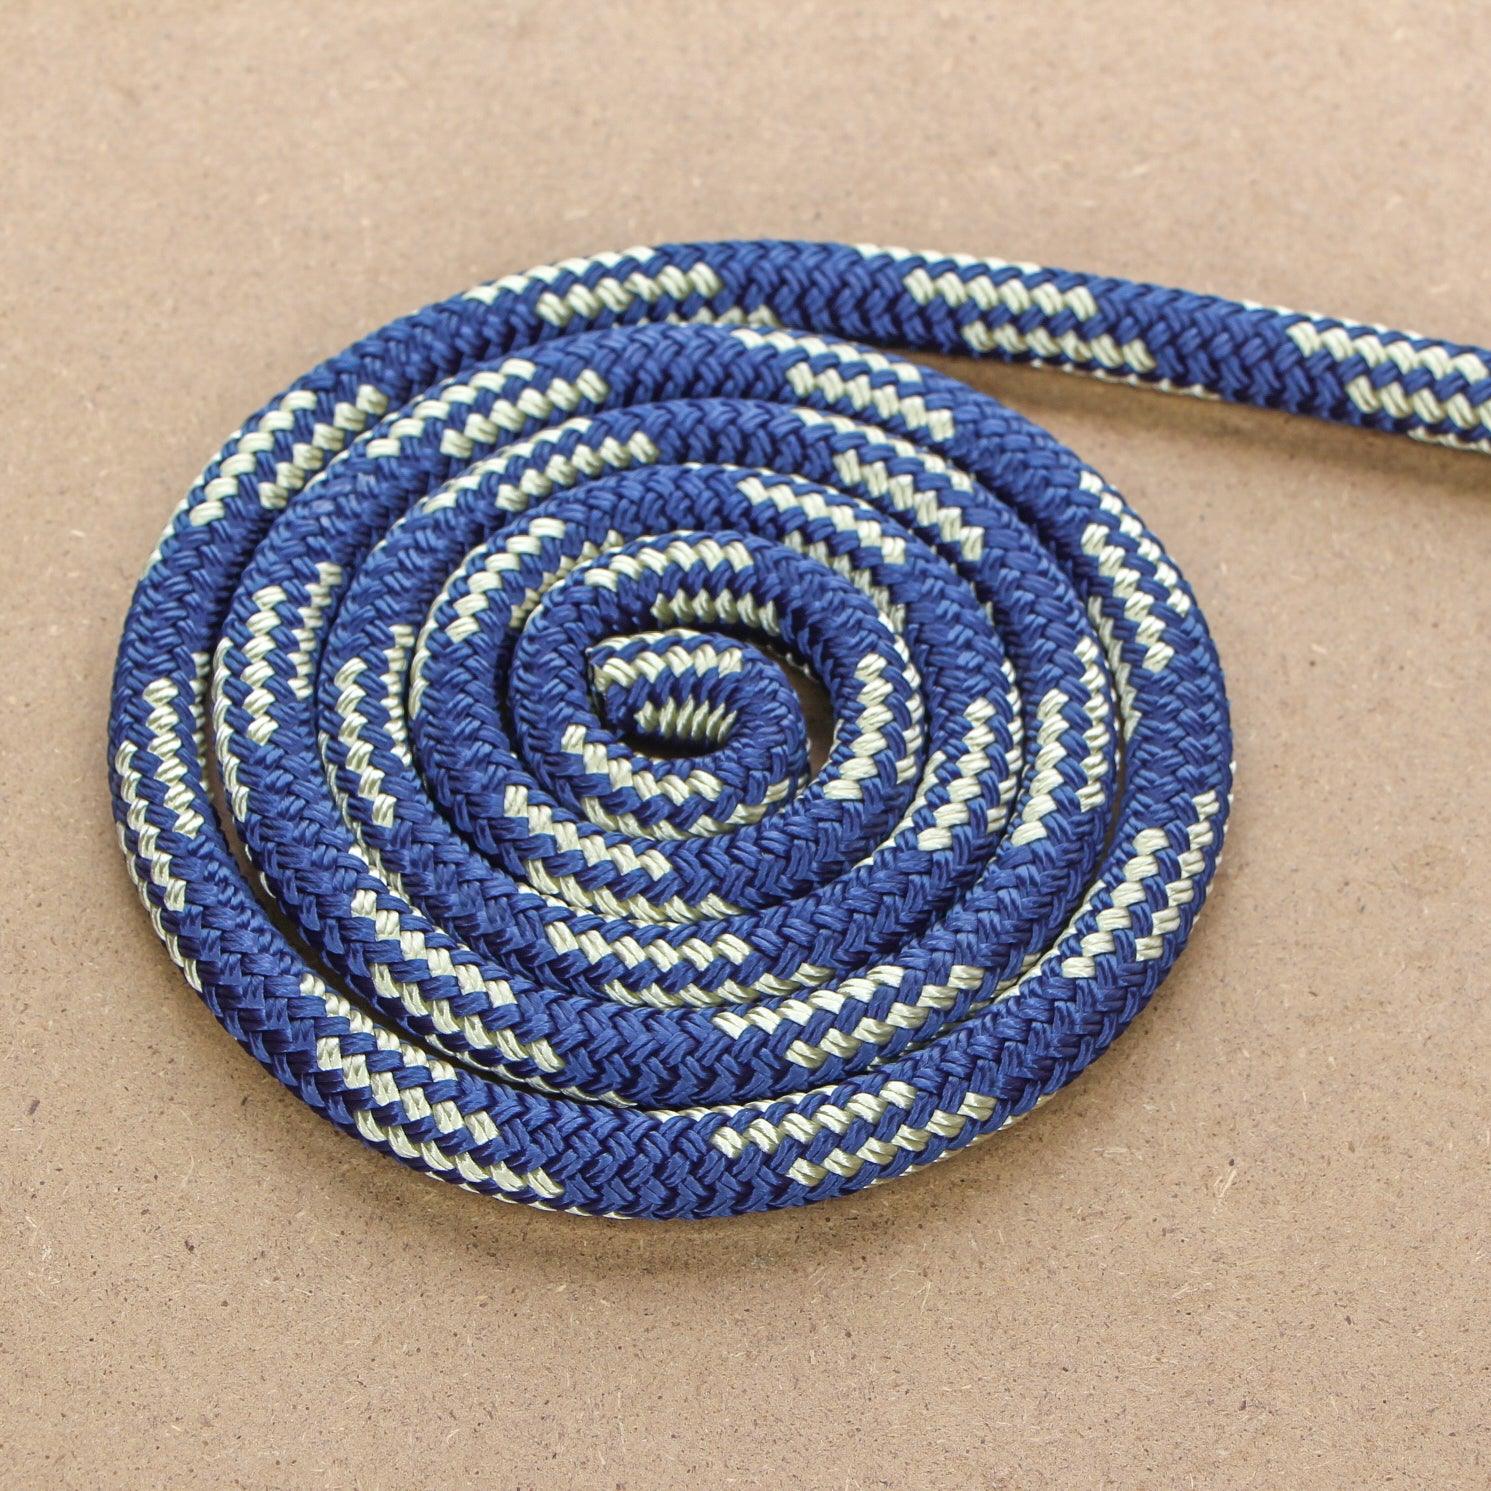 USA - Navy-Beige - 12mm - Cams Cords